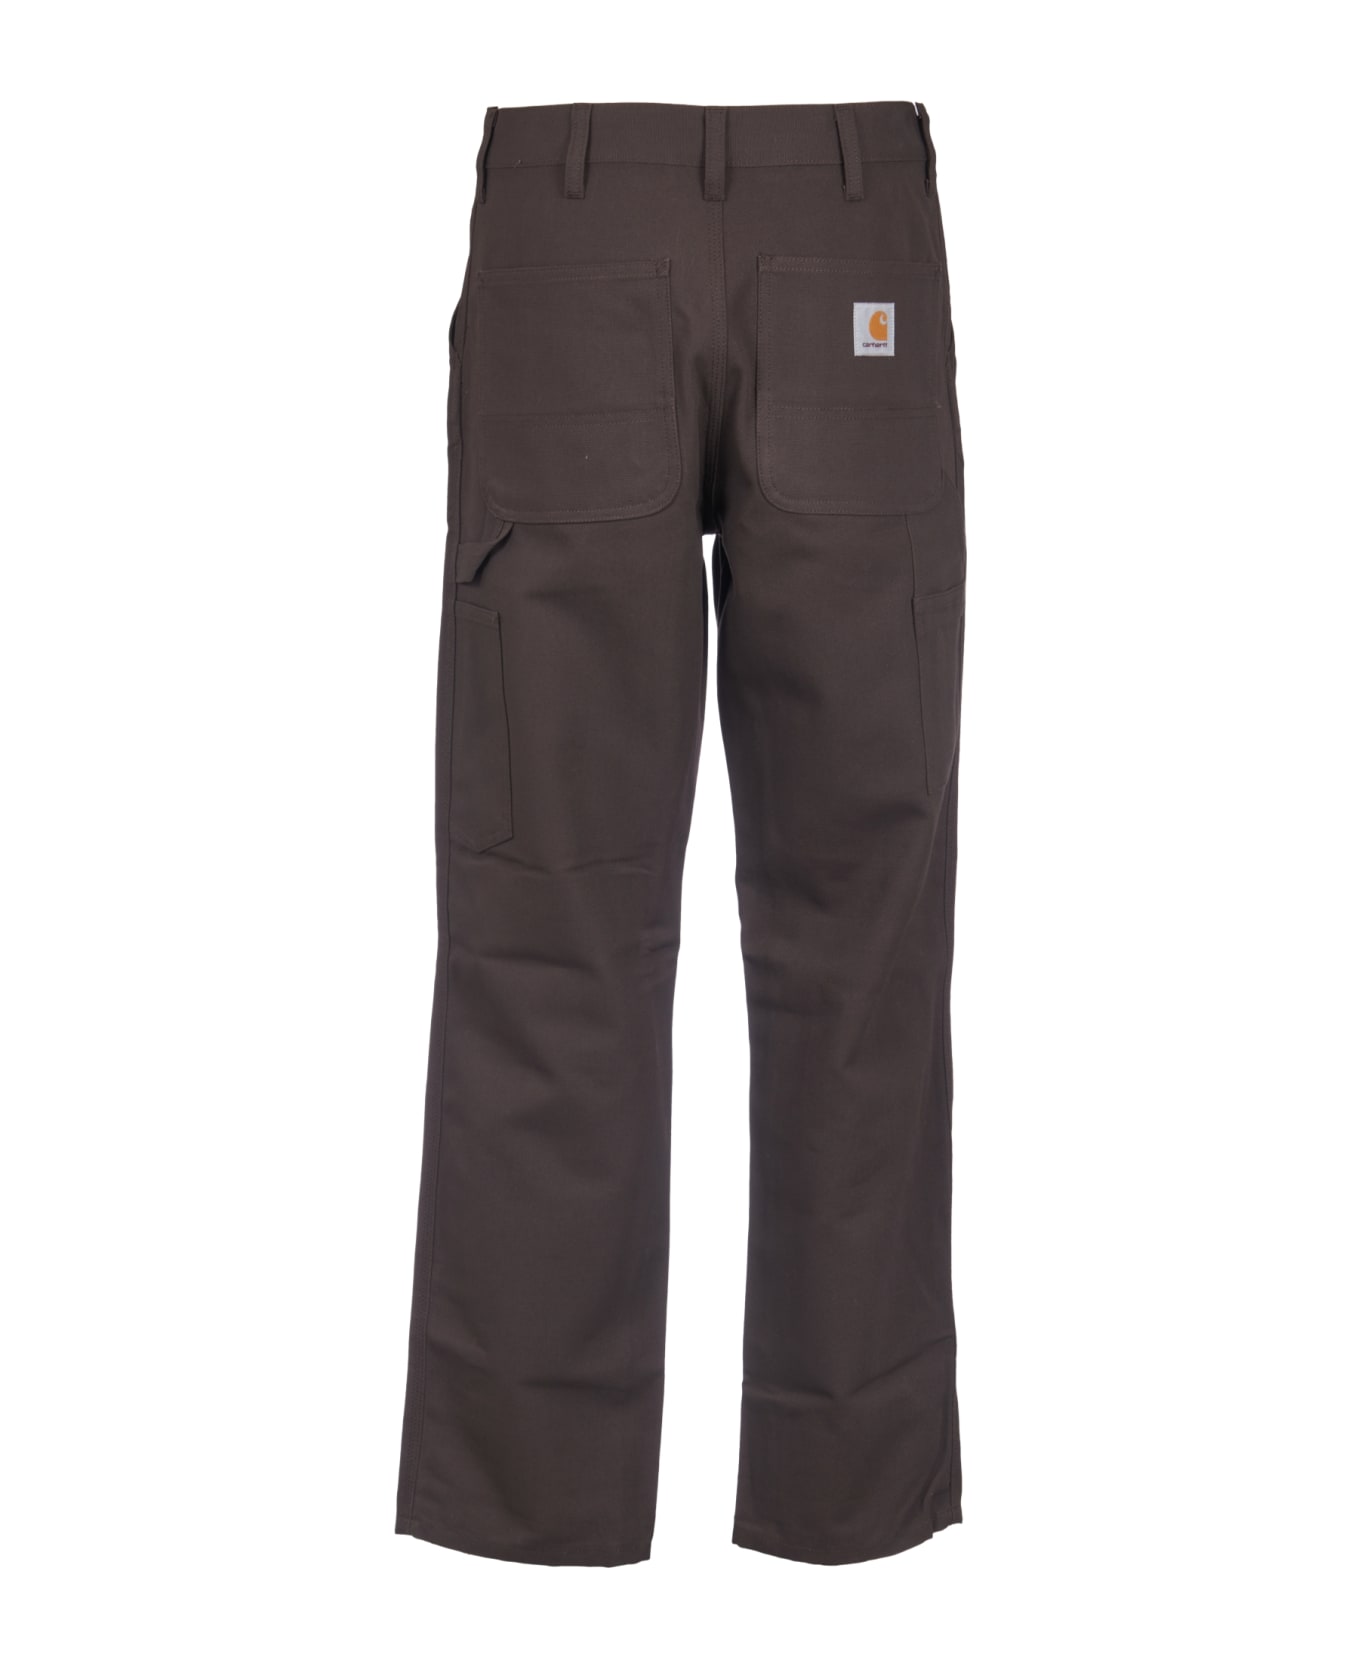 Carhartt Button Fitted Trousers - Tobacco